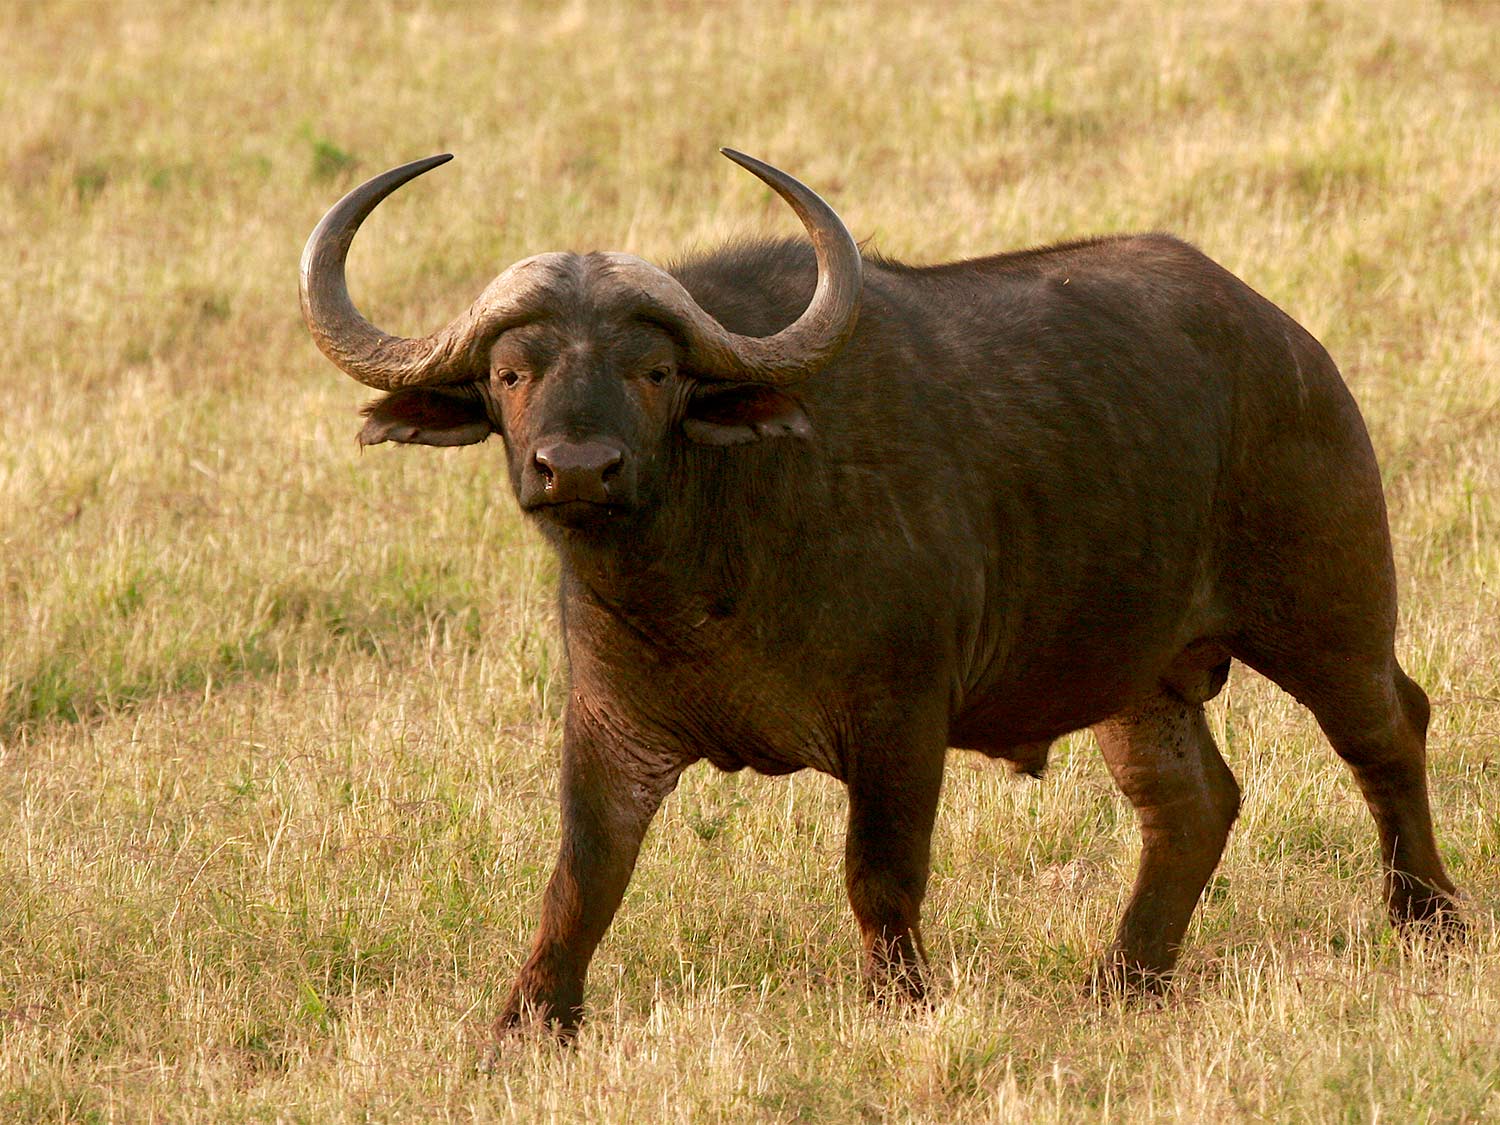 A cape buffalo standing in a field of grass.